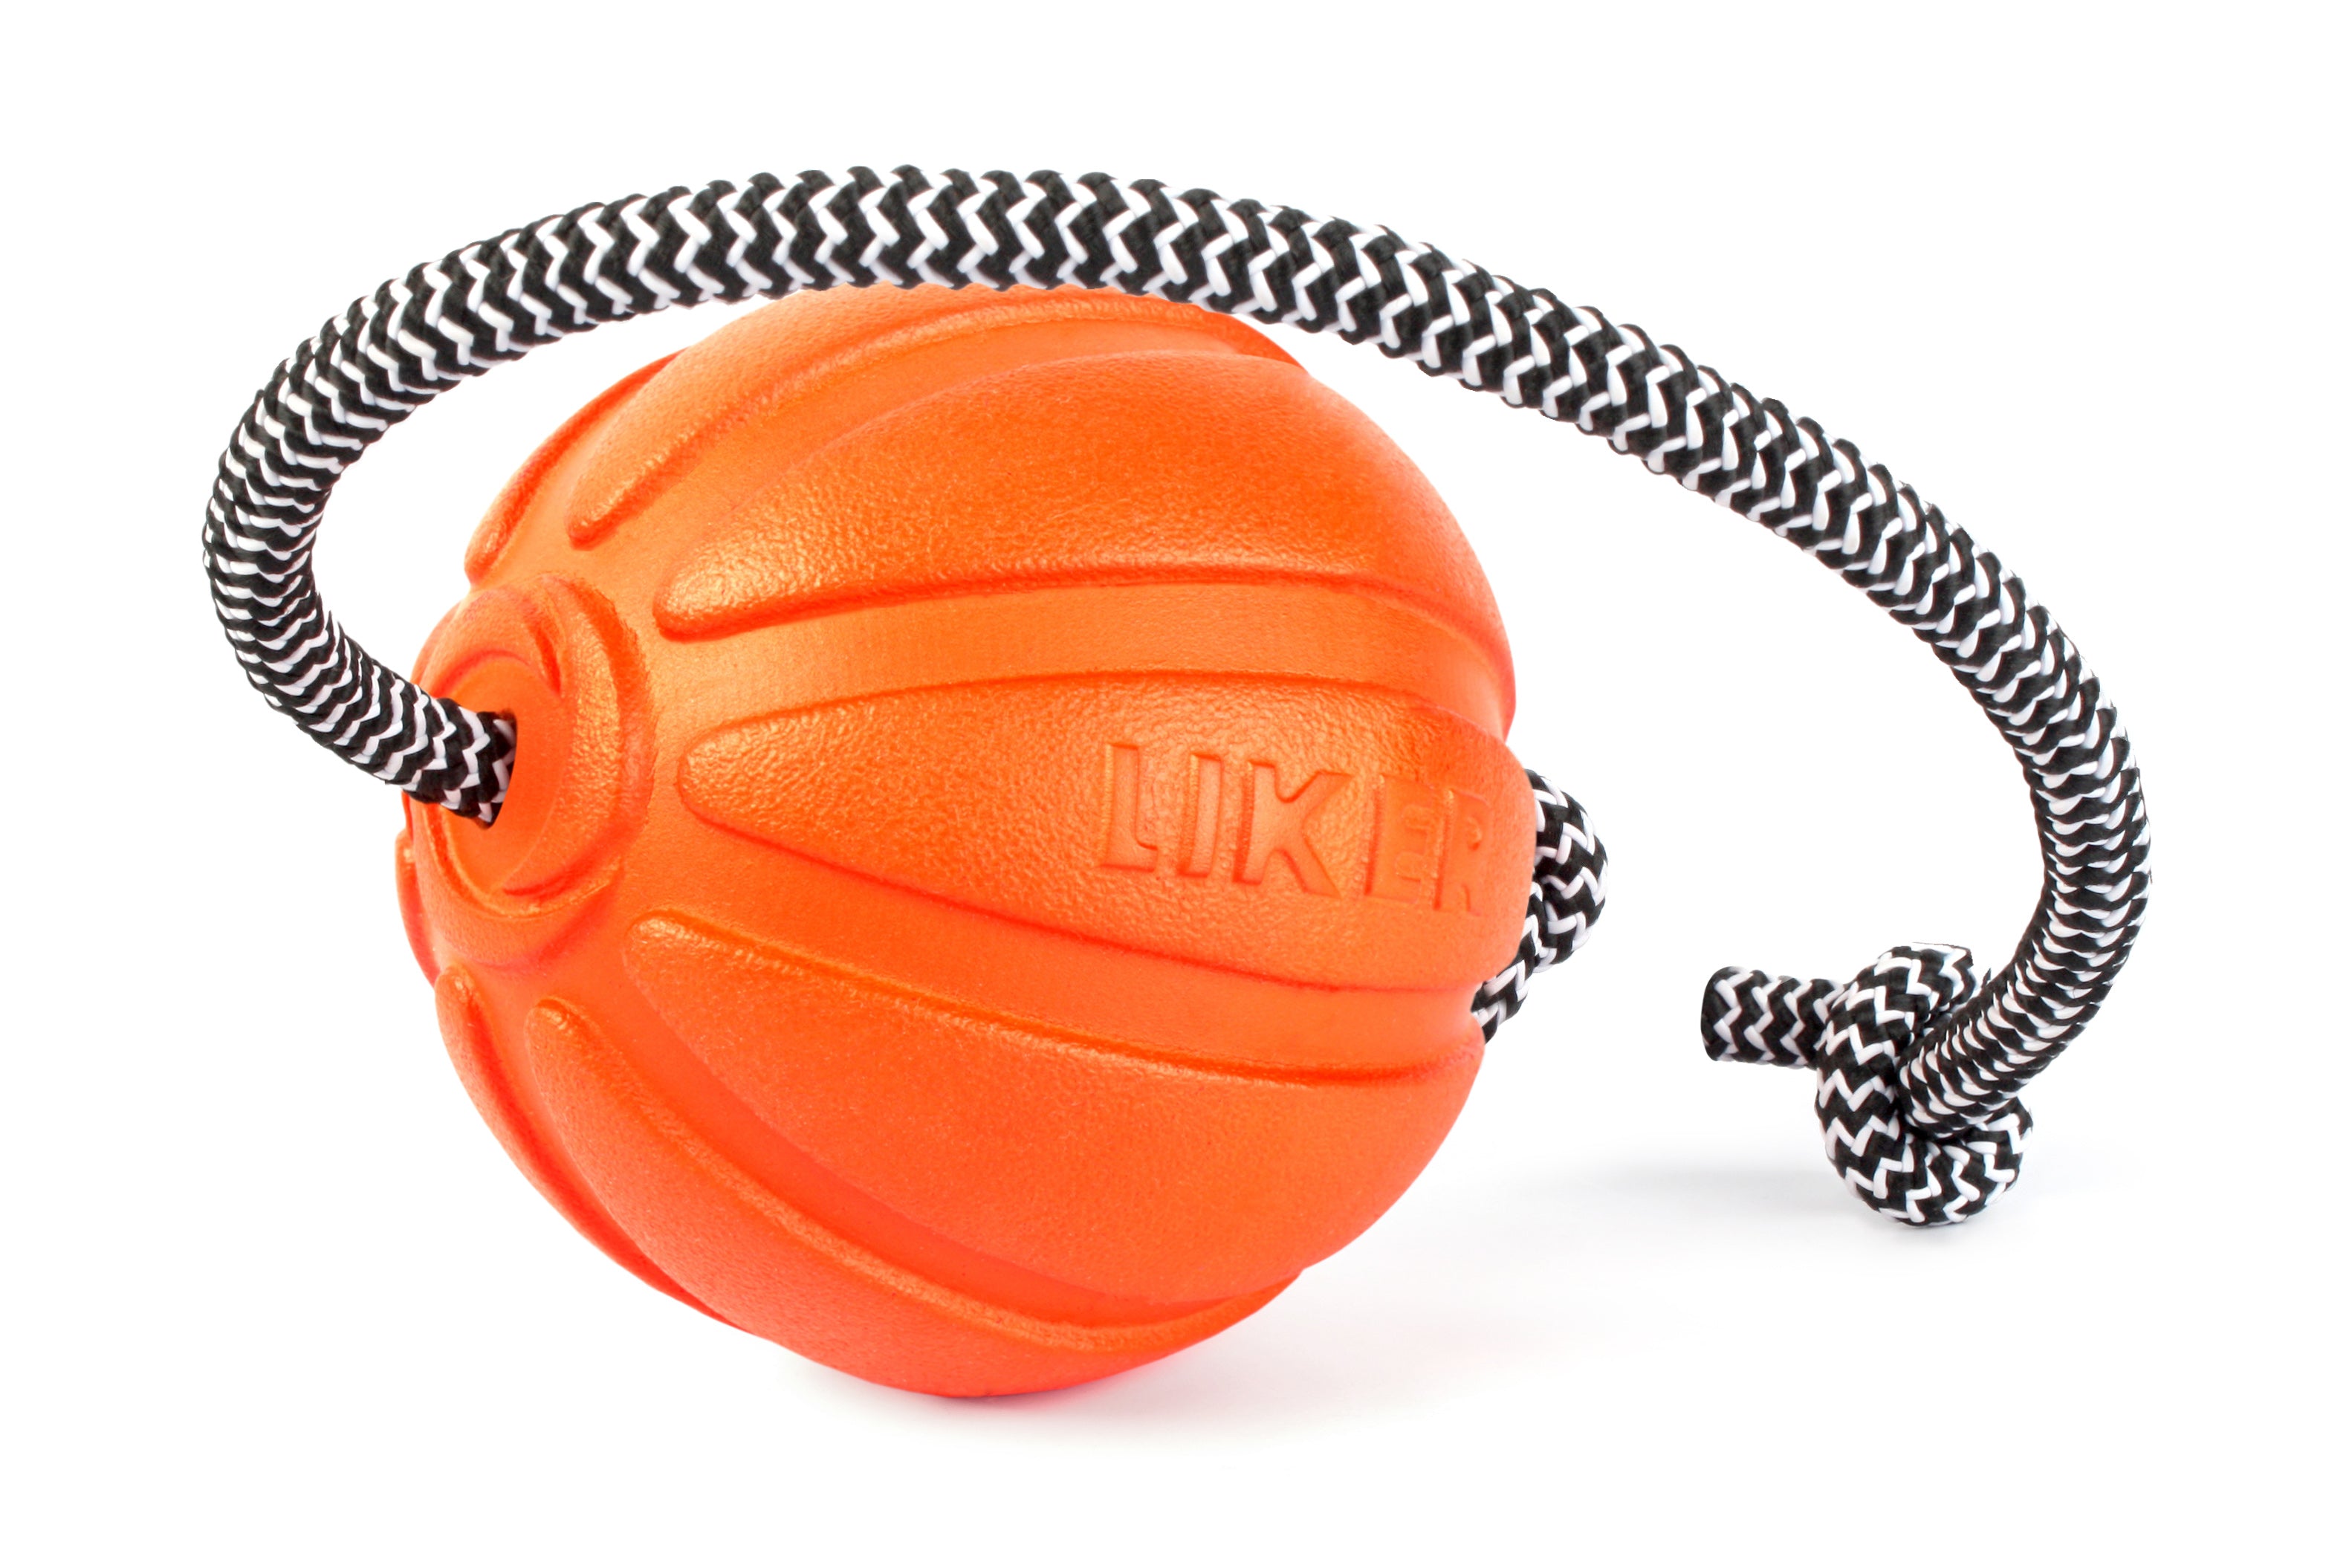 LIKER Cord 9 cm - lightweight, floating & soft - Ball with Cord